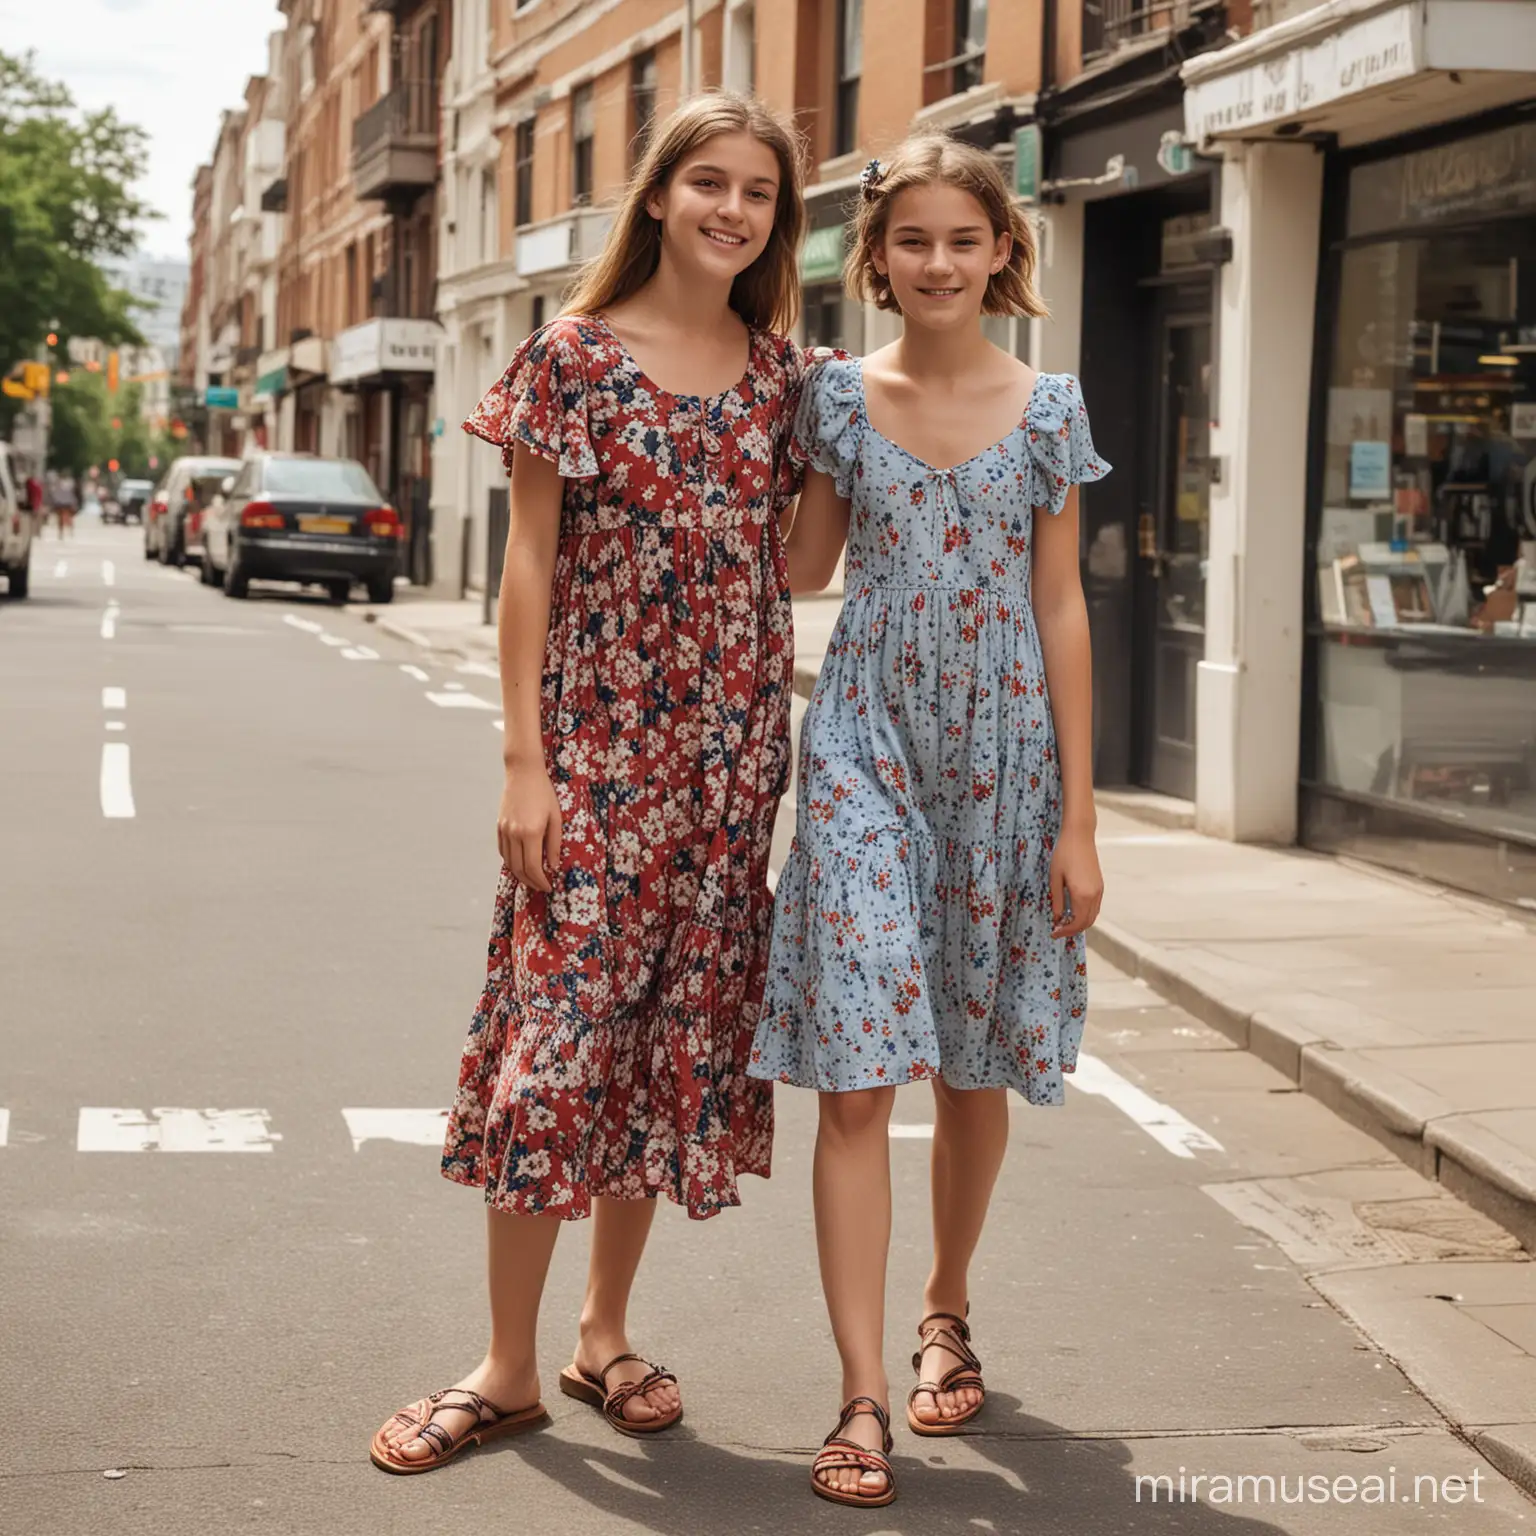 Teenage Boy in Floral Summer Dress Explores City with Older Sister